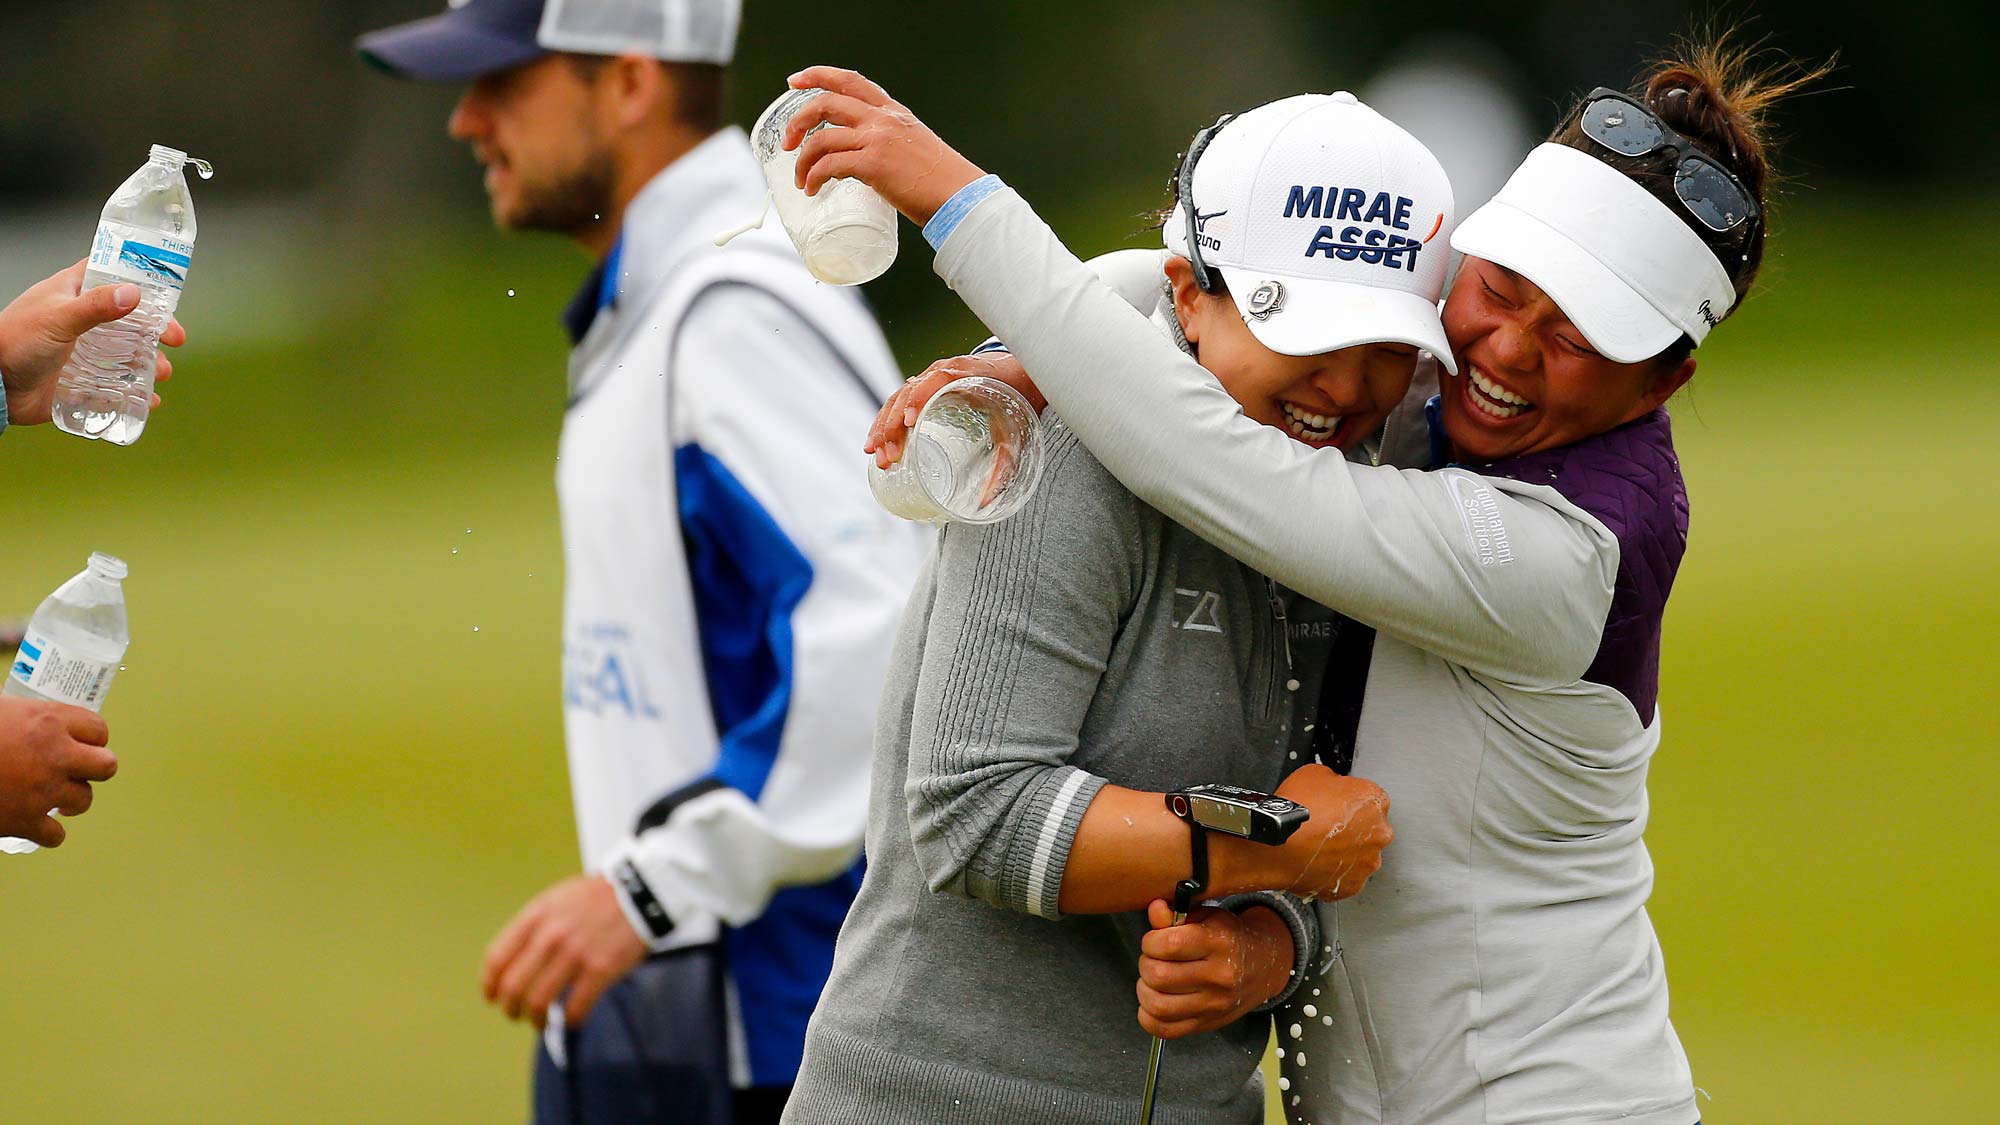 Sei Young Kim of South Korea is hugged by Meghan Kang after making a birdie putt in a sudden death playoff to win during the final round of the LPGA Mediheal Championship